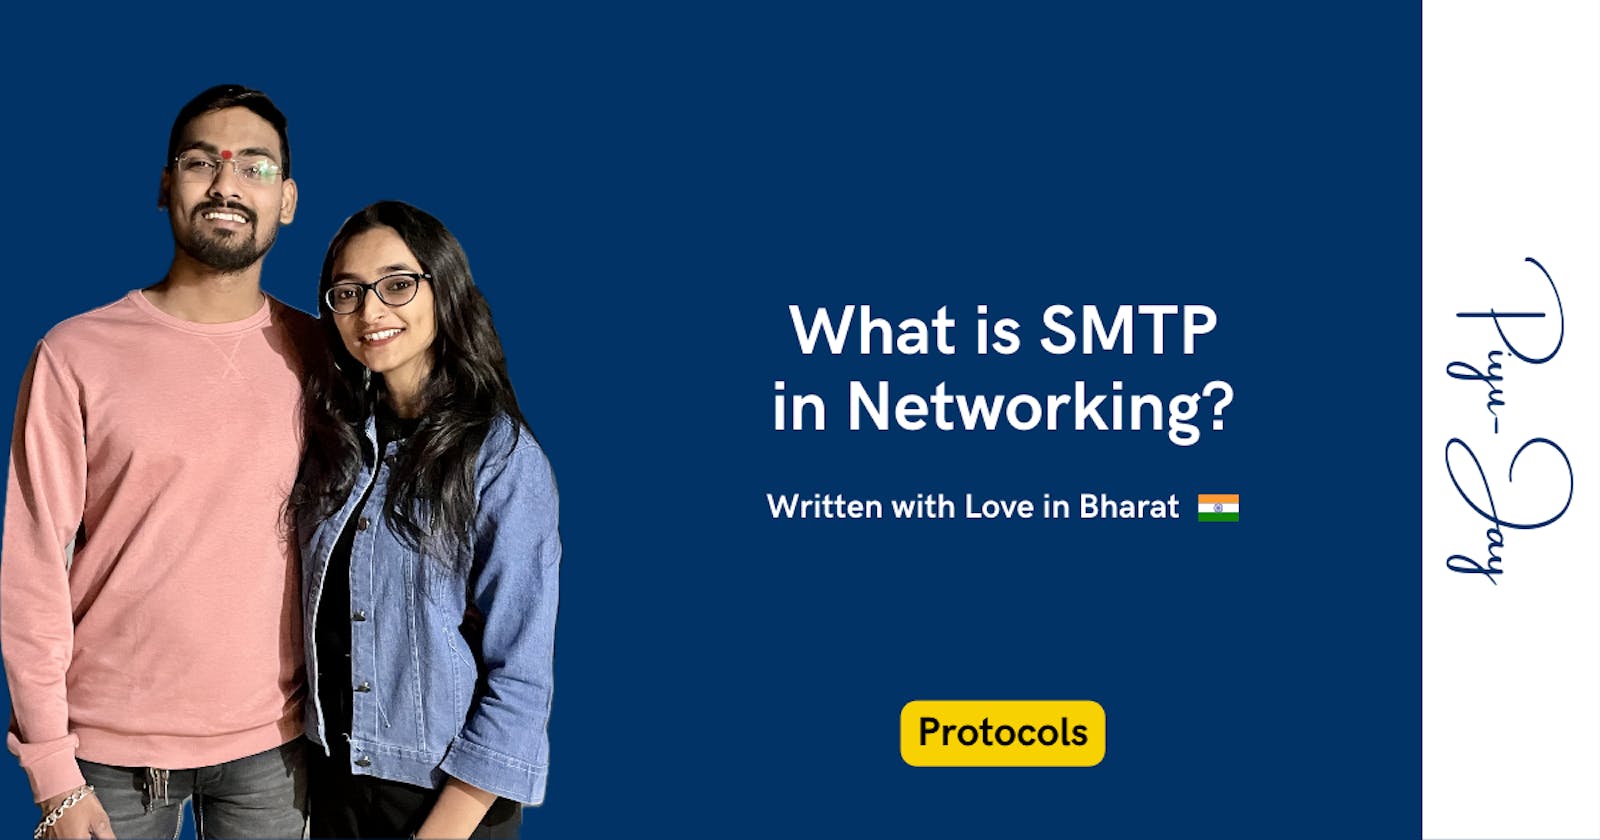 What is SMTP in Networking?